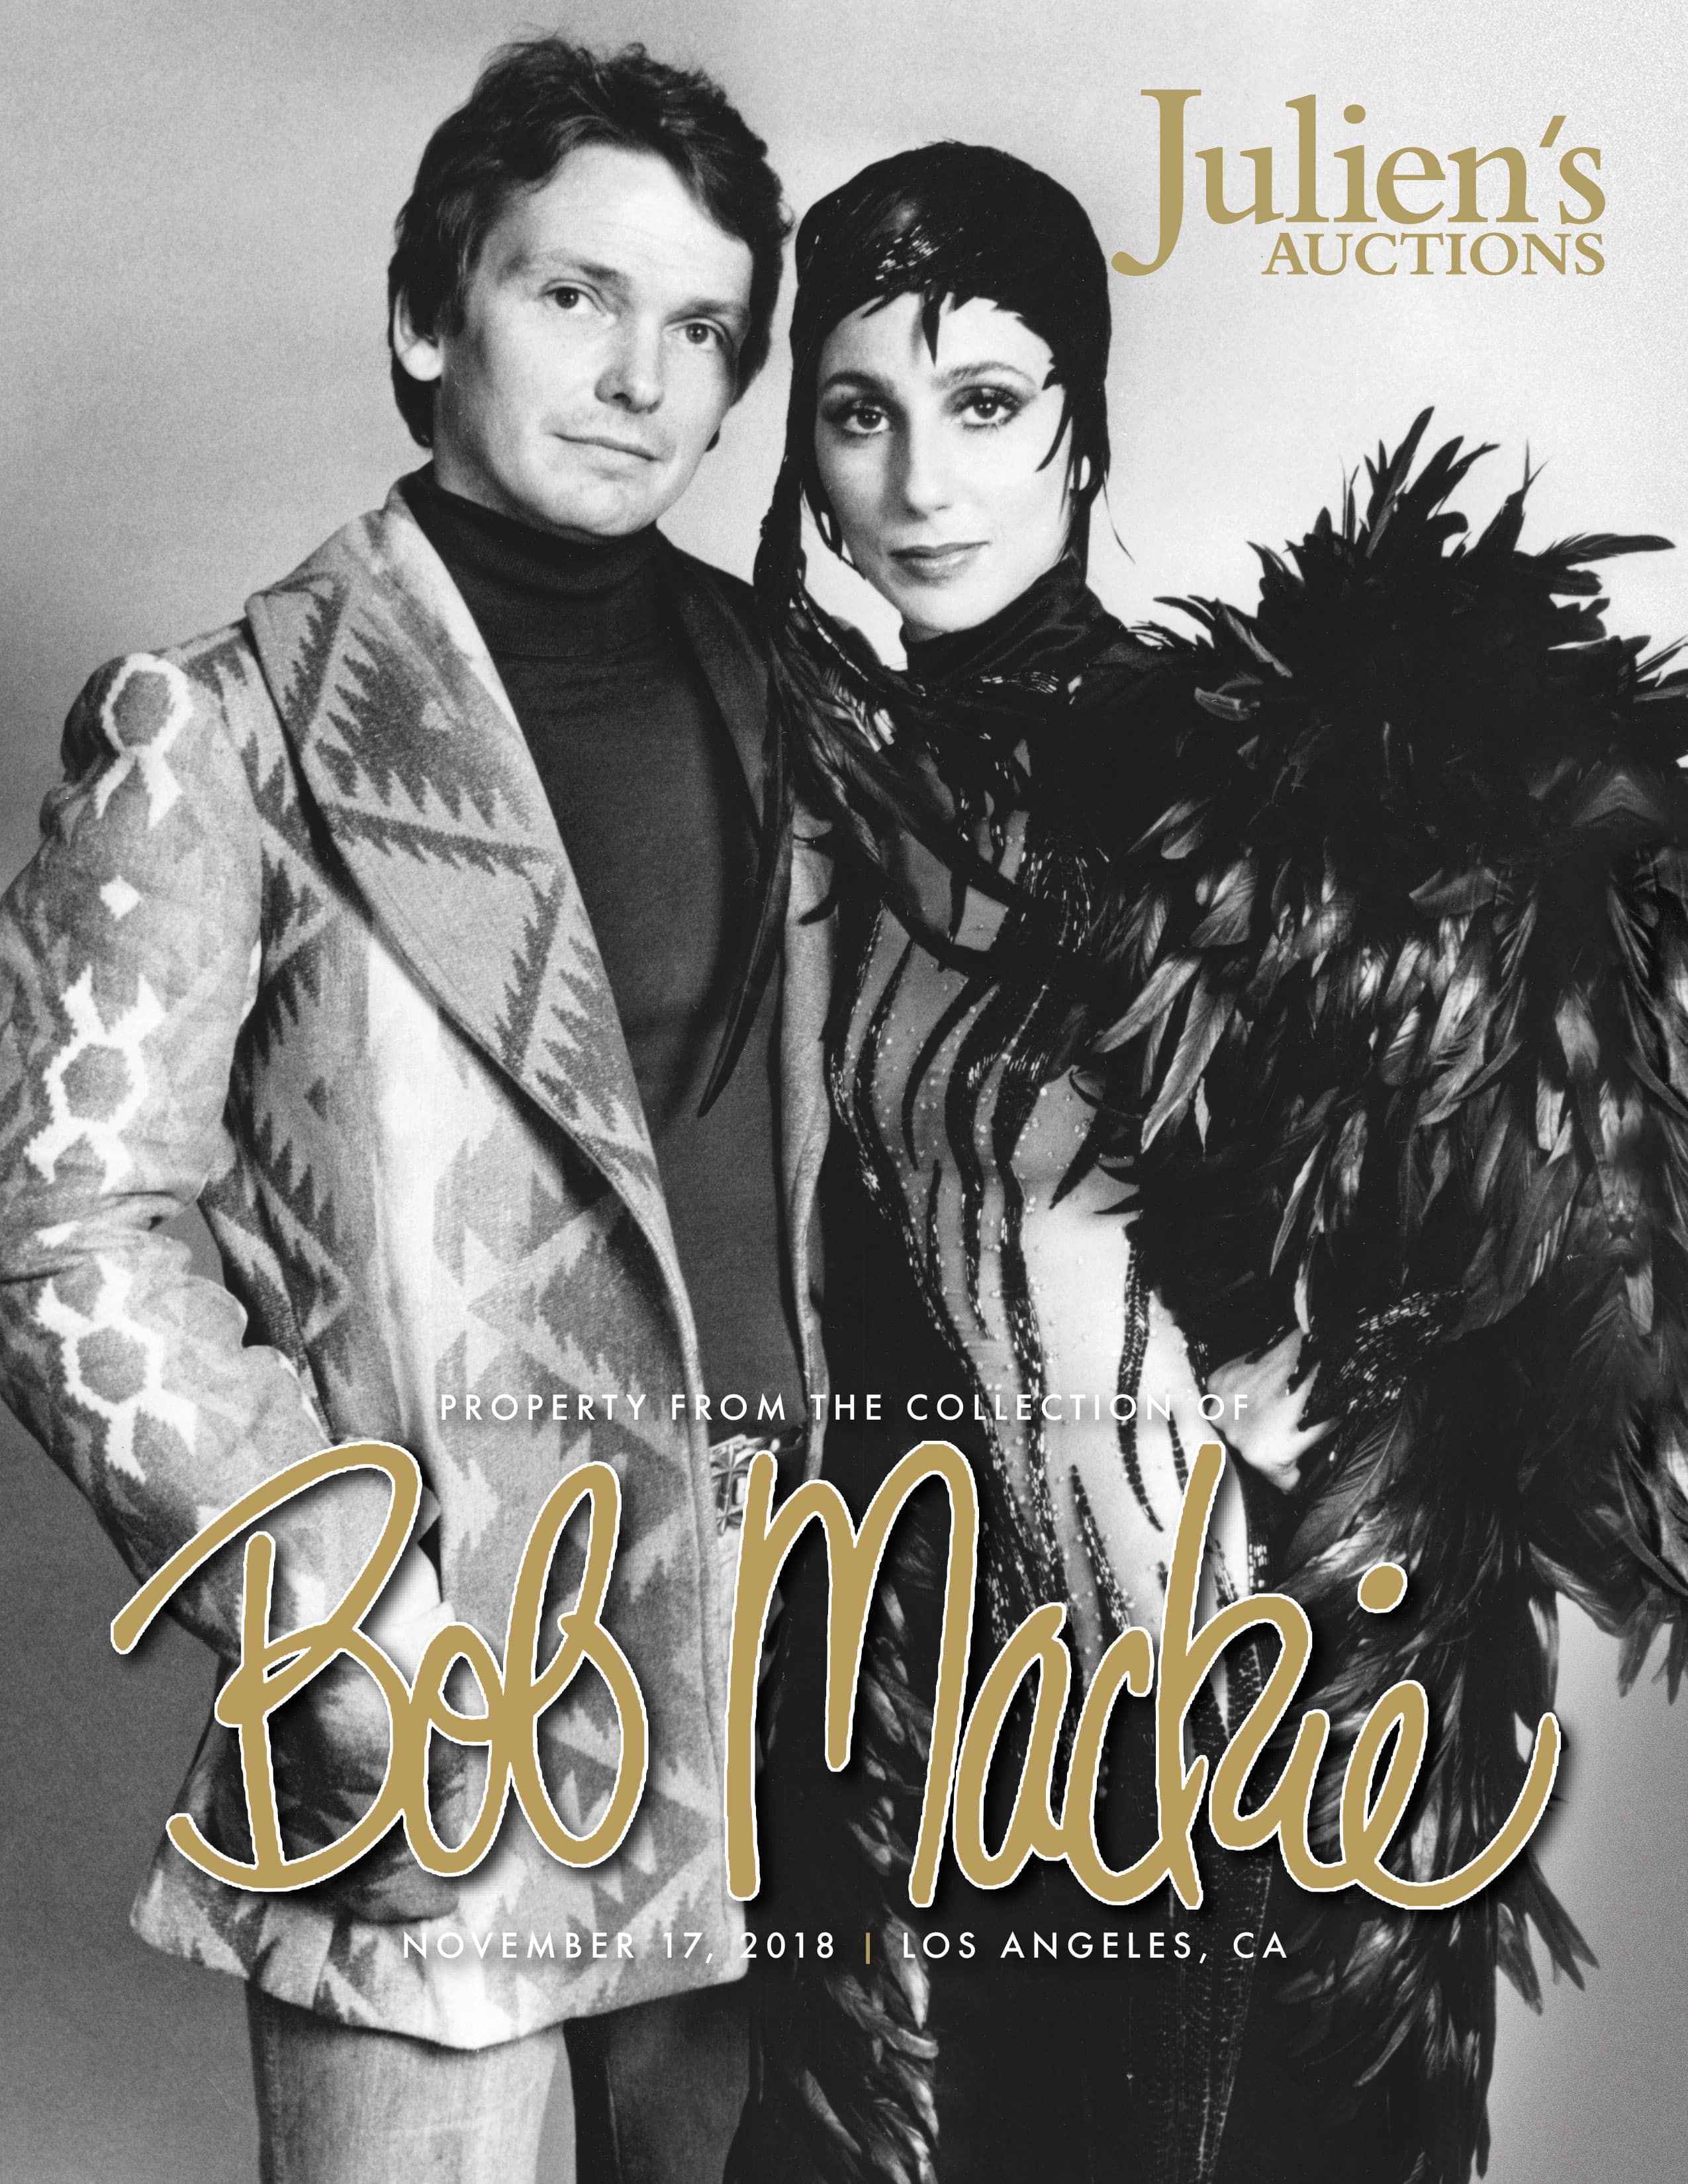 Bob Mackie Collection goes on auction November 17 2018 in Los Angeles